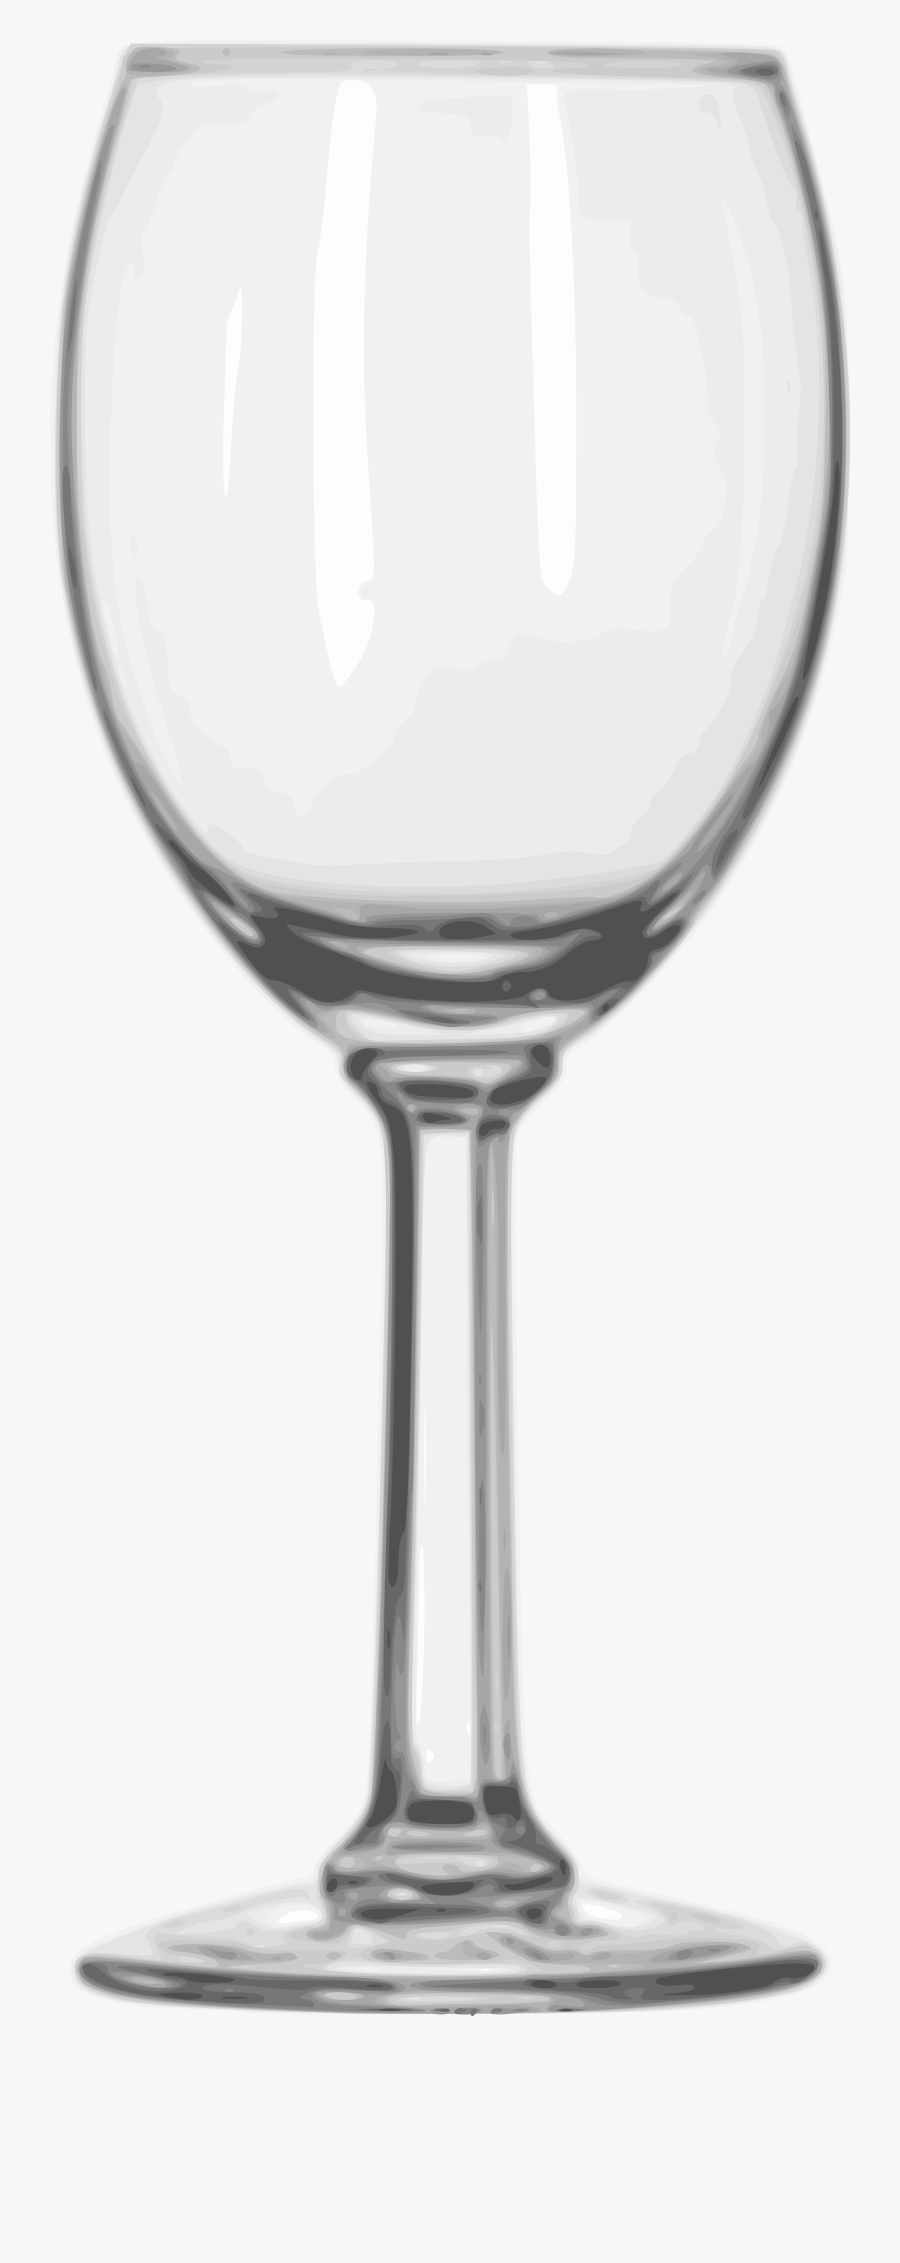 Glass Png Images - Empty Wine Glass Png, Transparent Clipart